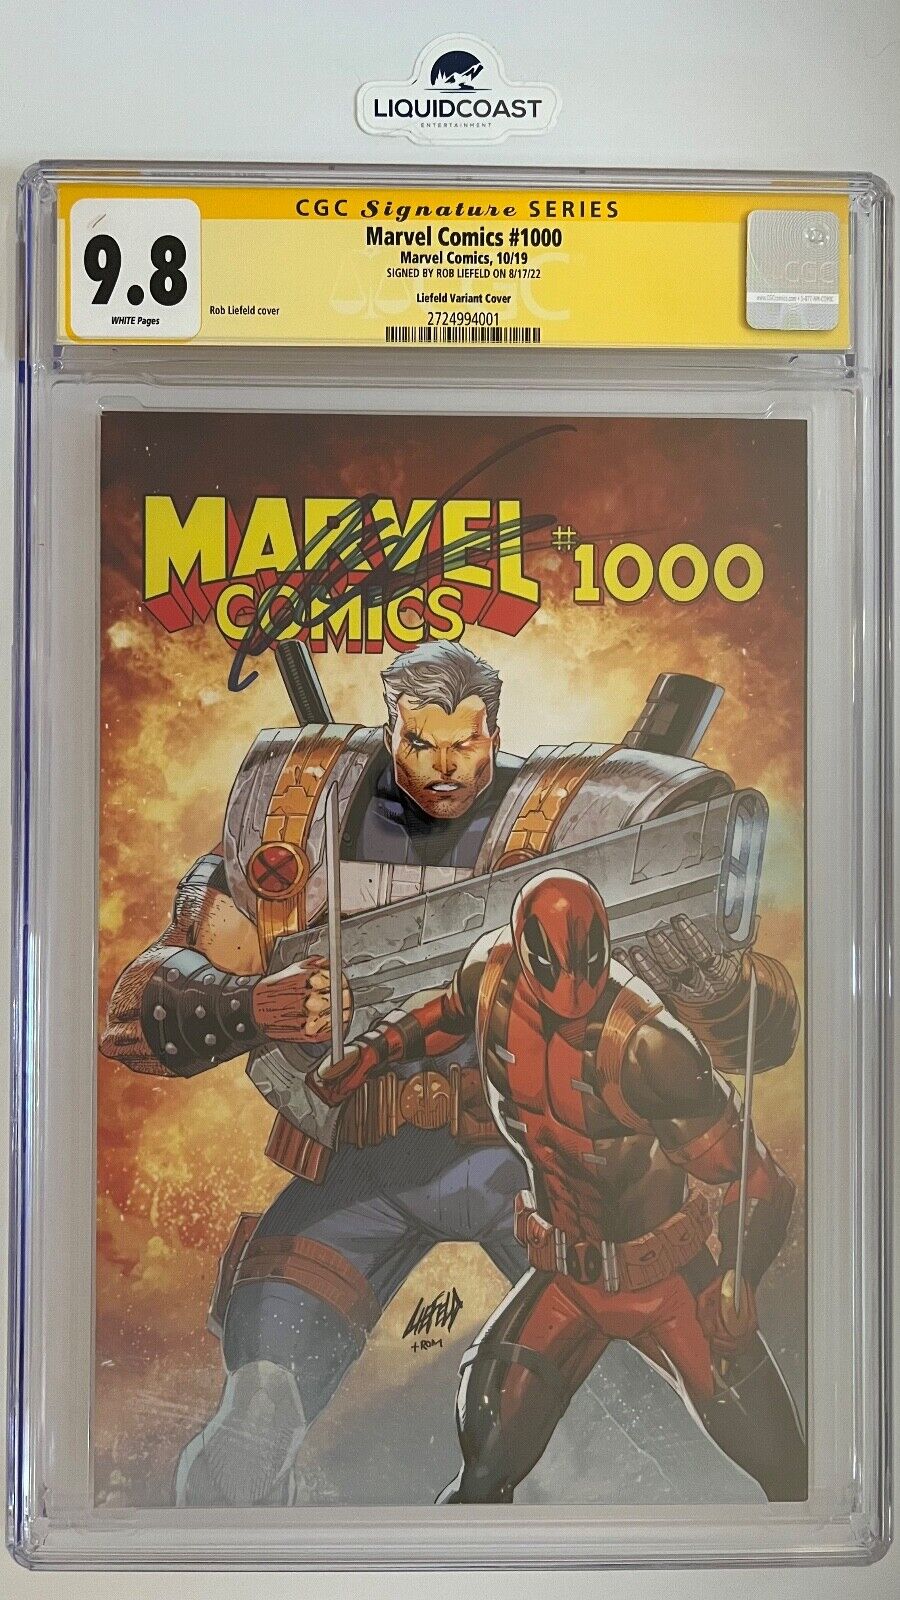 Marvel Comics #1000 SS CGC 9.8 SIGNED BY ROB LIEFELD Liefeld Variant Cover